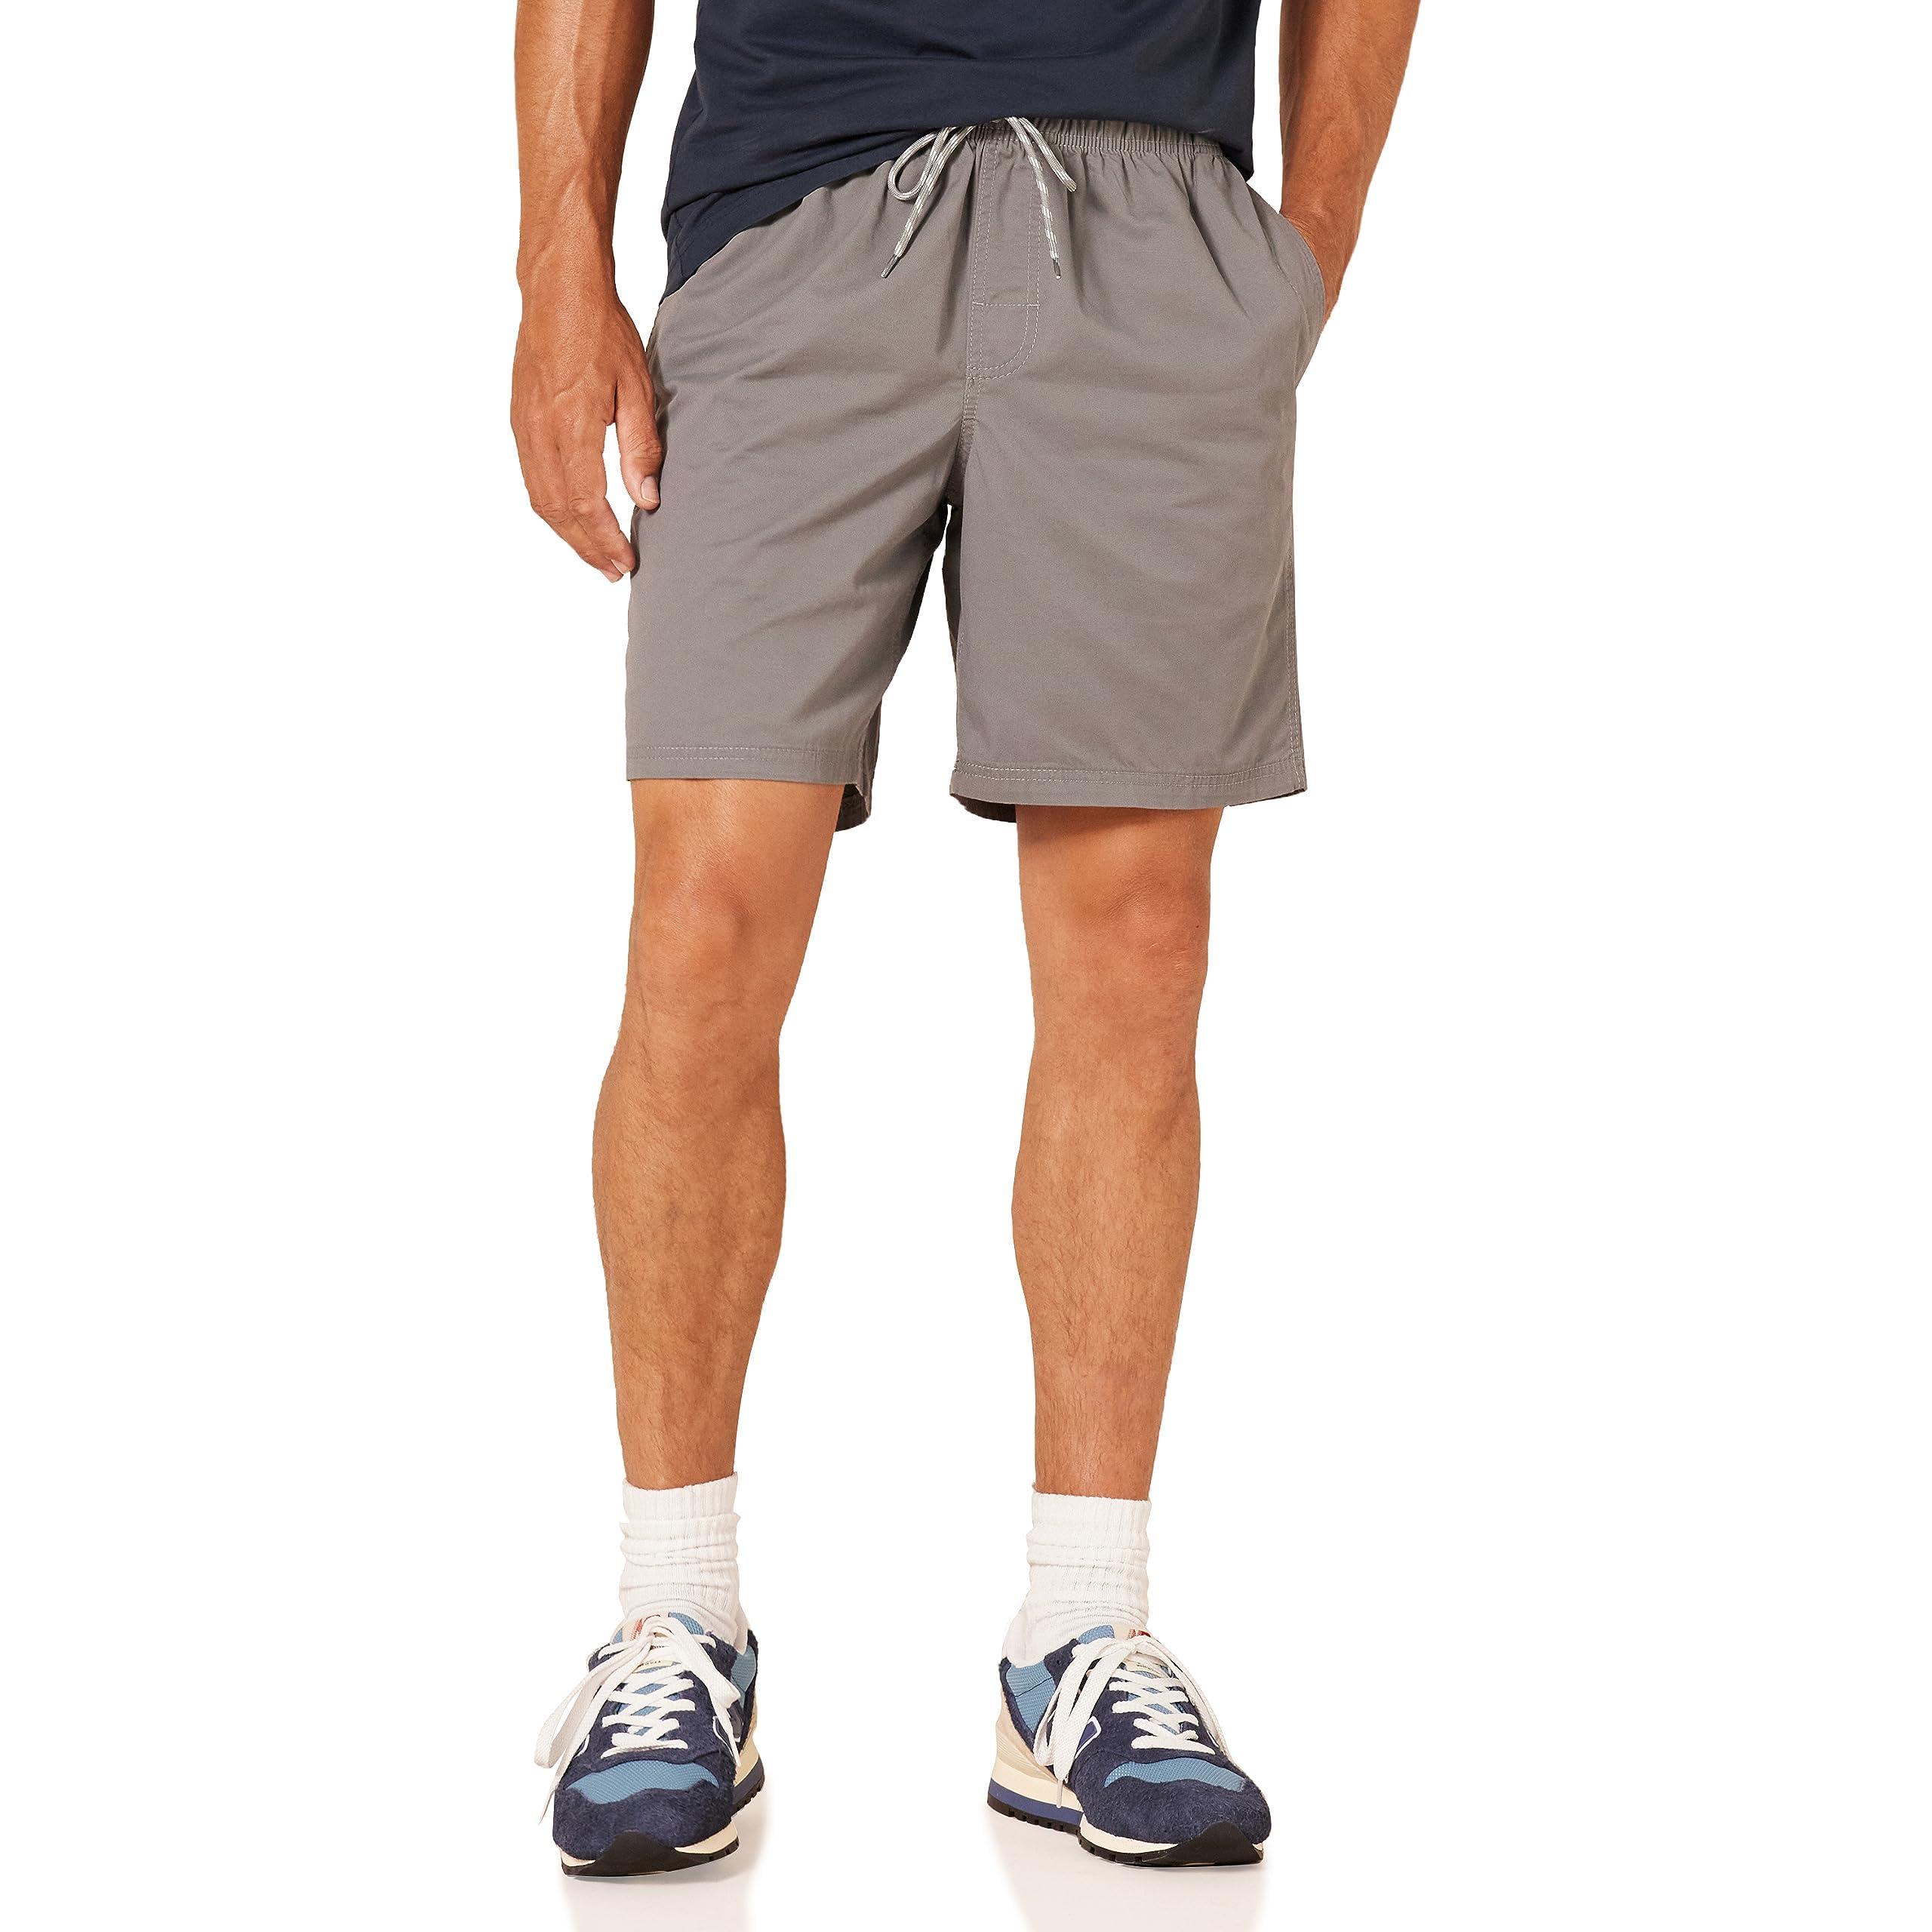 Amazon Essentials Men's Drawstring Walk Short (Available in Plus Size), Grey, X-Large $7.4